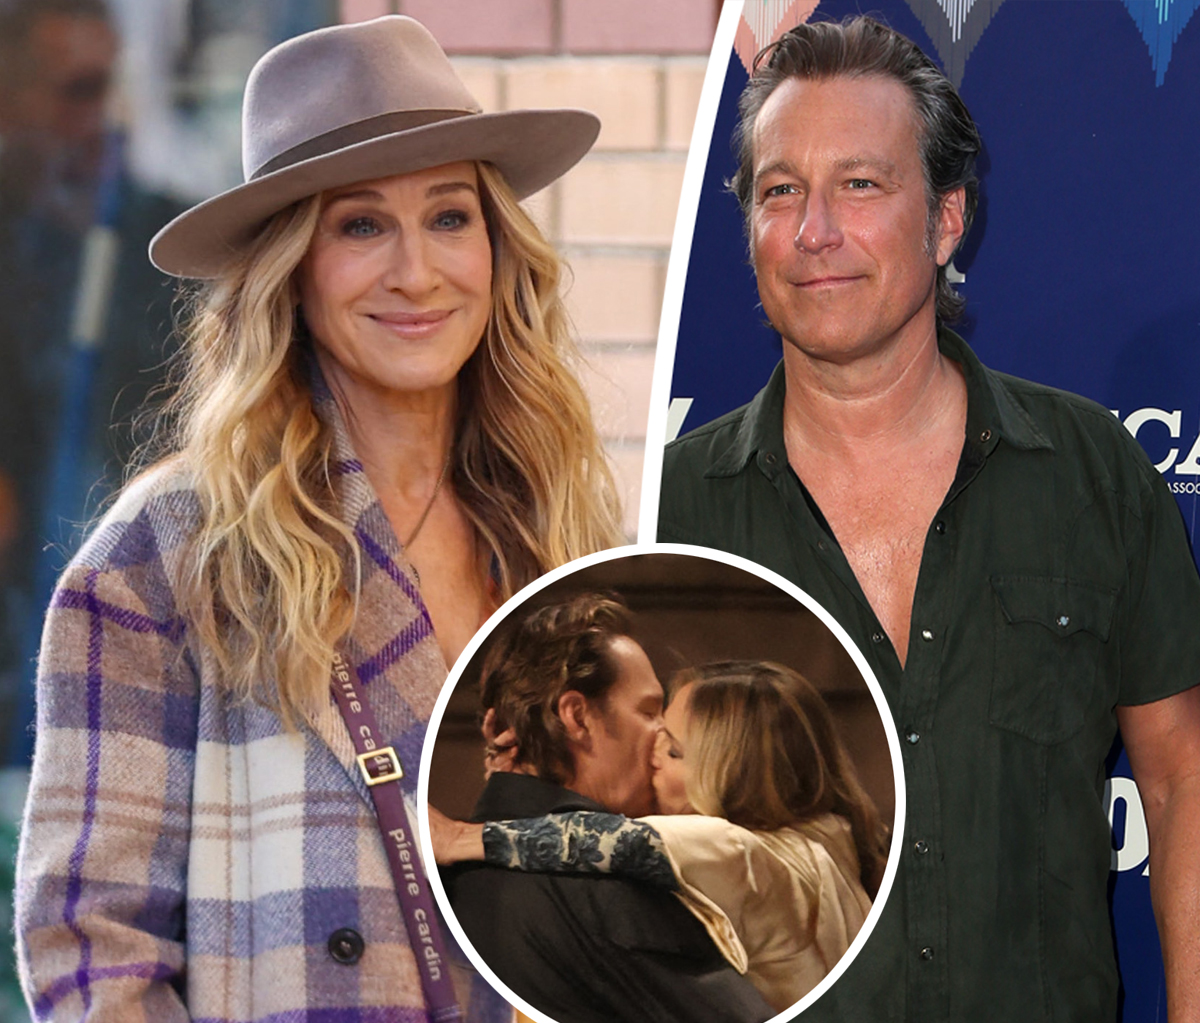 https://perezhilton.com/wp-content/uploads/2023/02/Sarah-Jessica-Parker-And-John-Corbett-Share-Steamy-Kiss-While-Filming-And-Just-Like-That.jpg